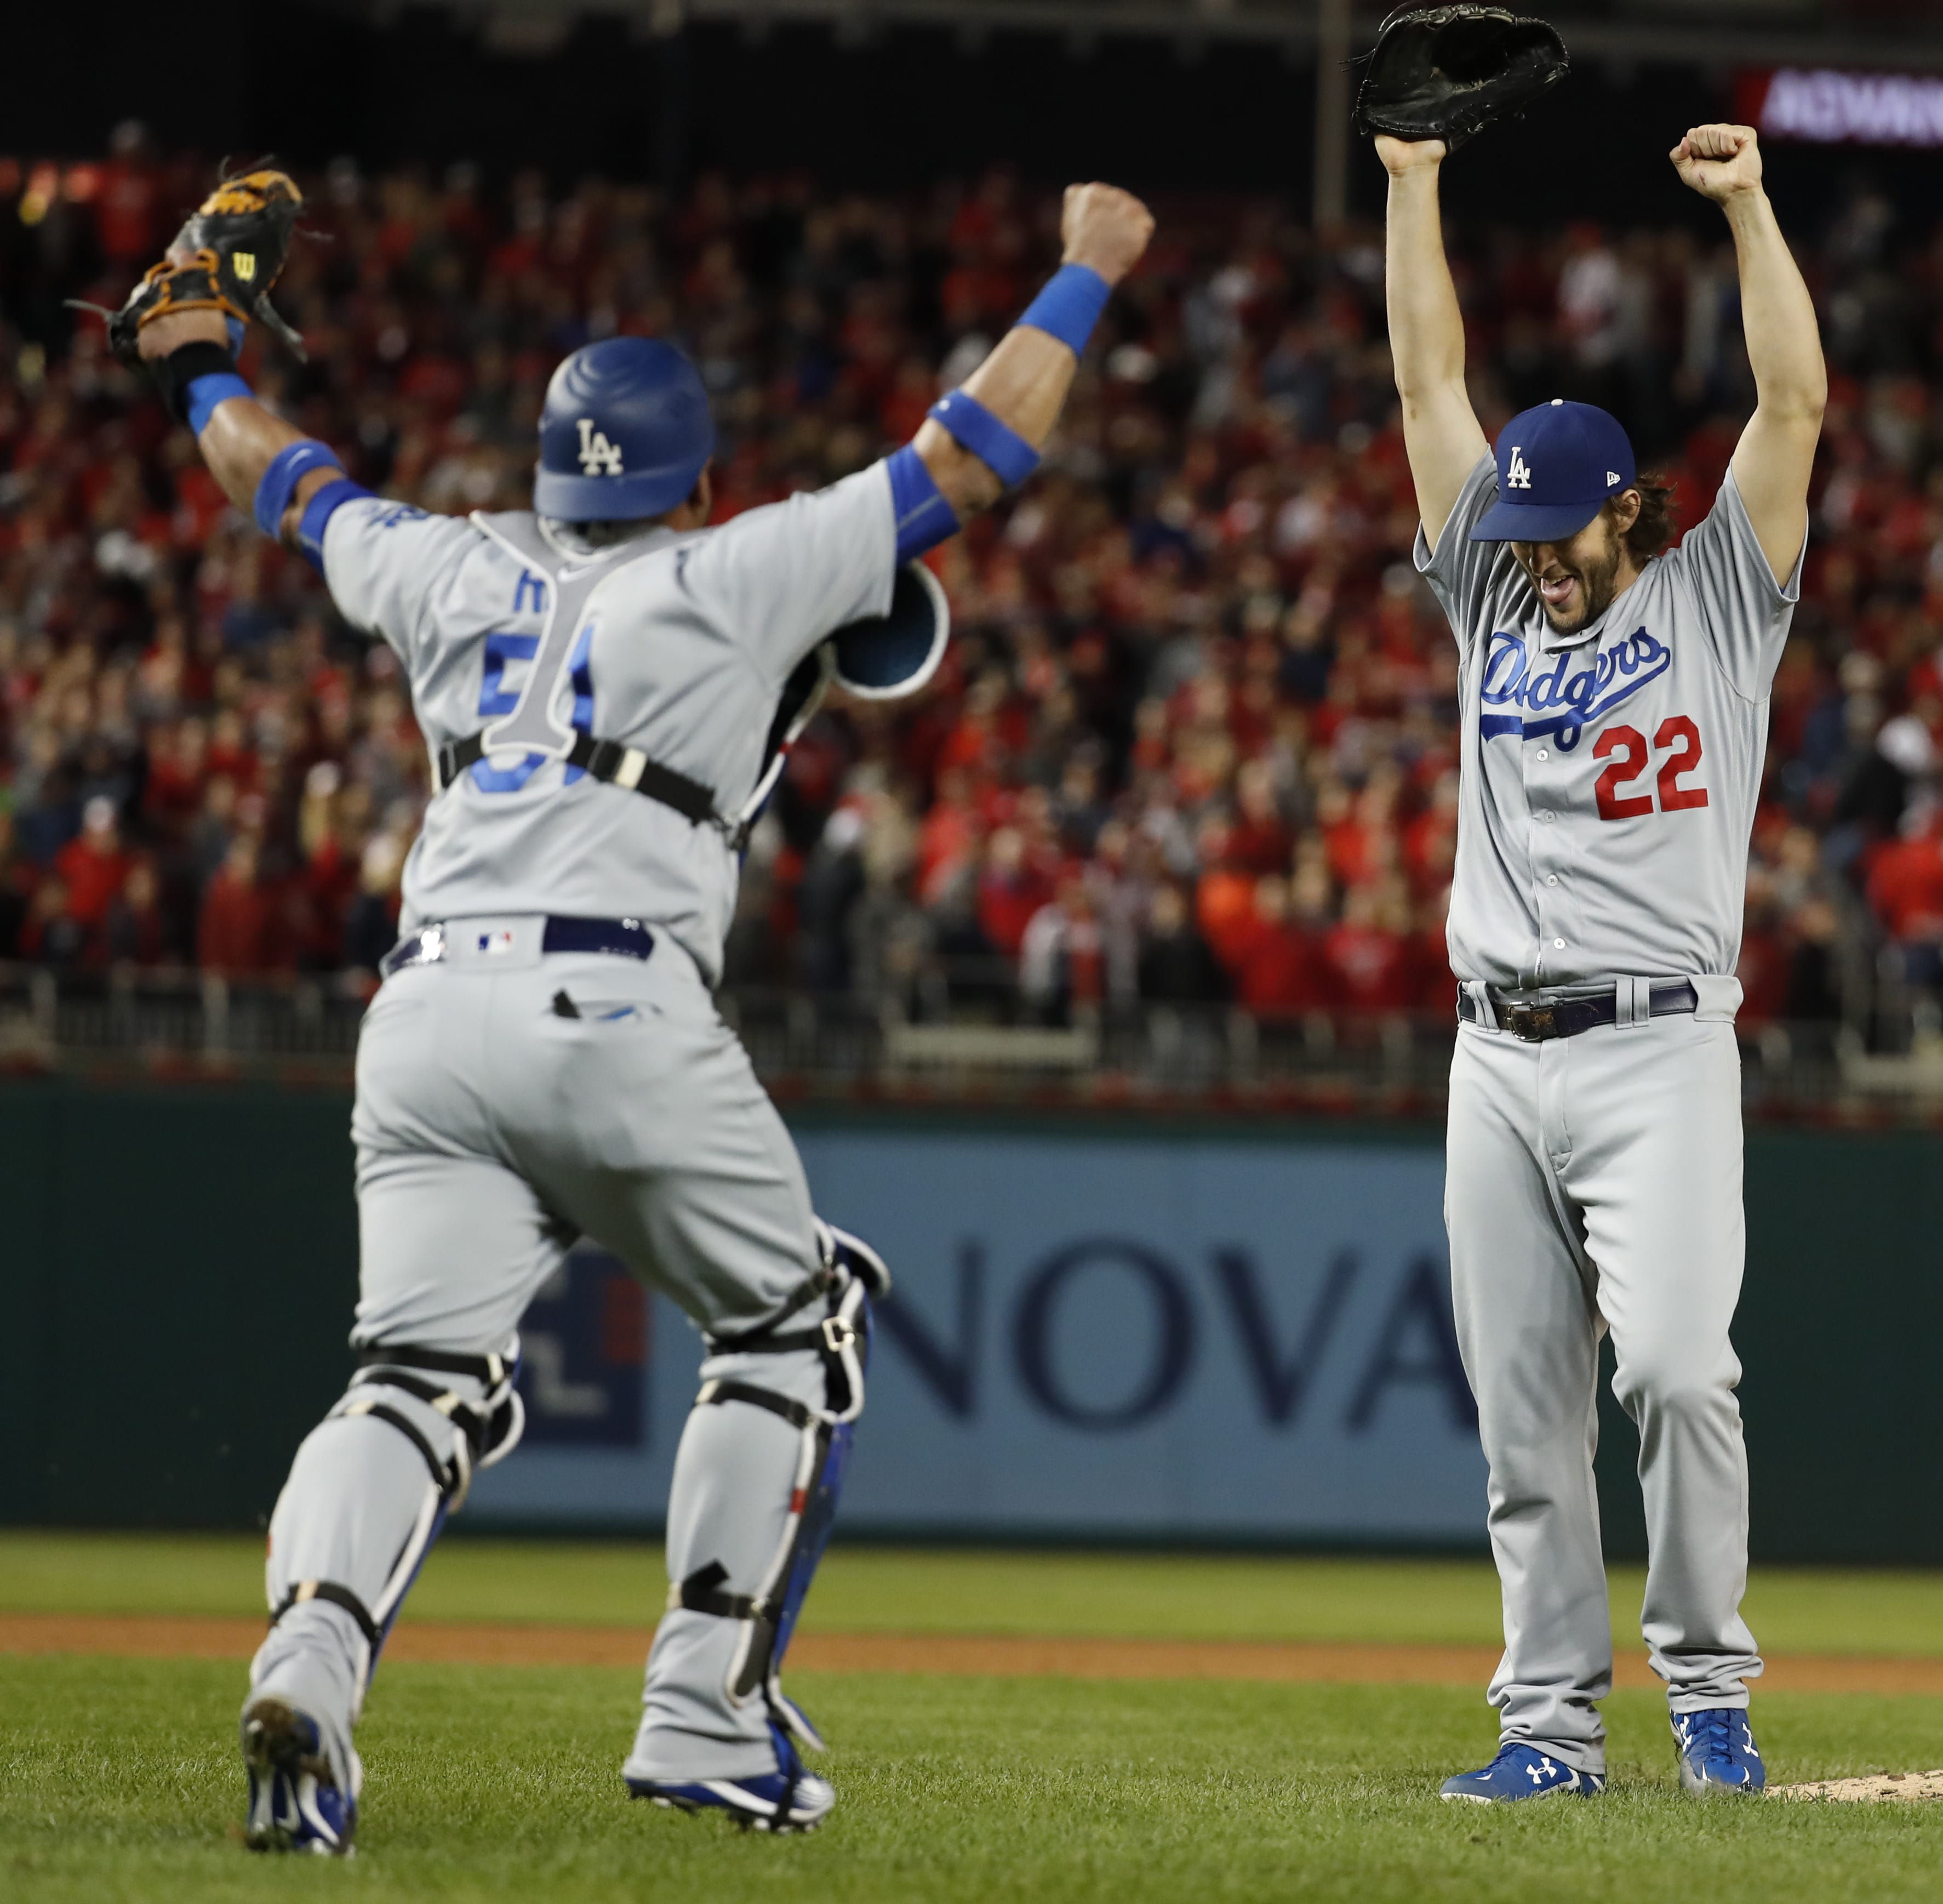 Los Angeles Dodgers pitcher Clayton Kershaw (22) and catcher Carlos Ruiz celebrate after Washington Nationals' Wilmer Difo struck out to end Game 5 of baseball's National League Division Series at Nationals Park early Friday, Oct. 14, 2016, in Washington. The Dodgers won 4-3.